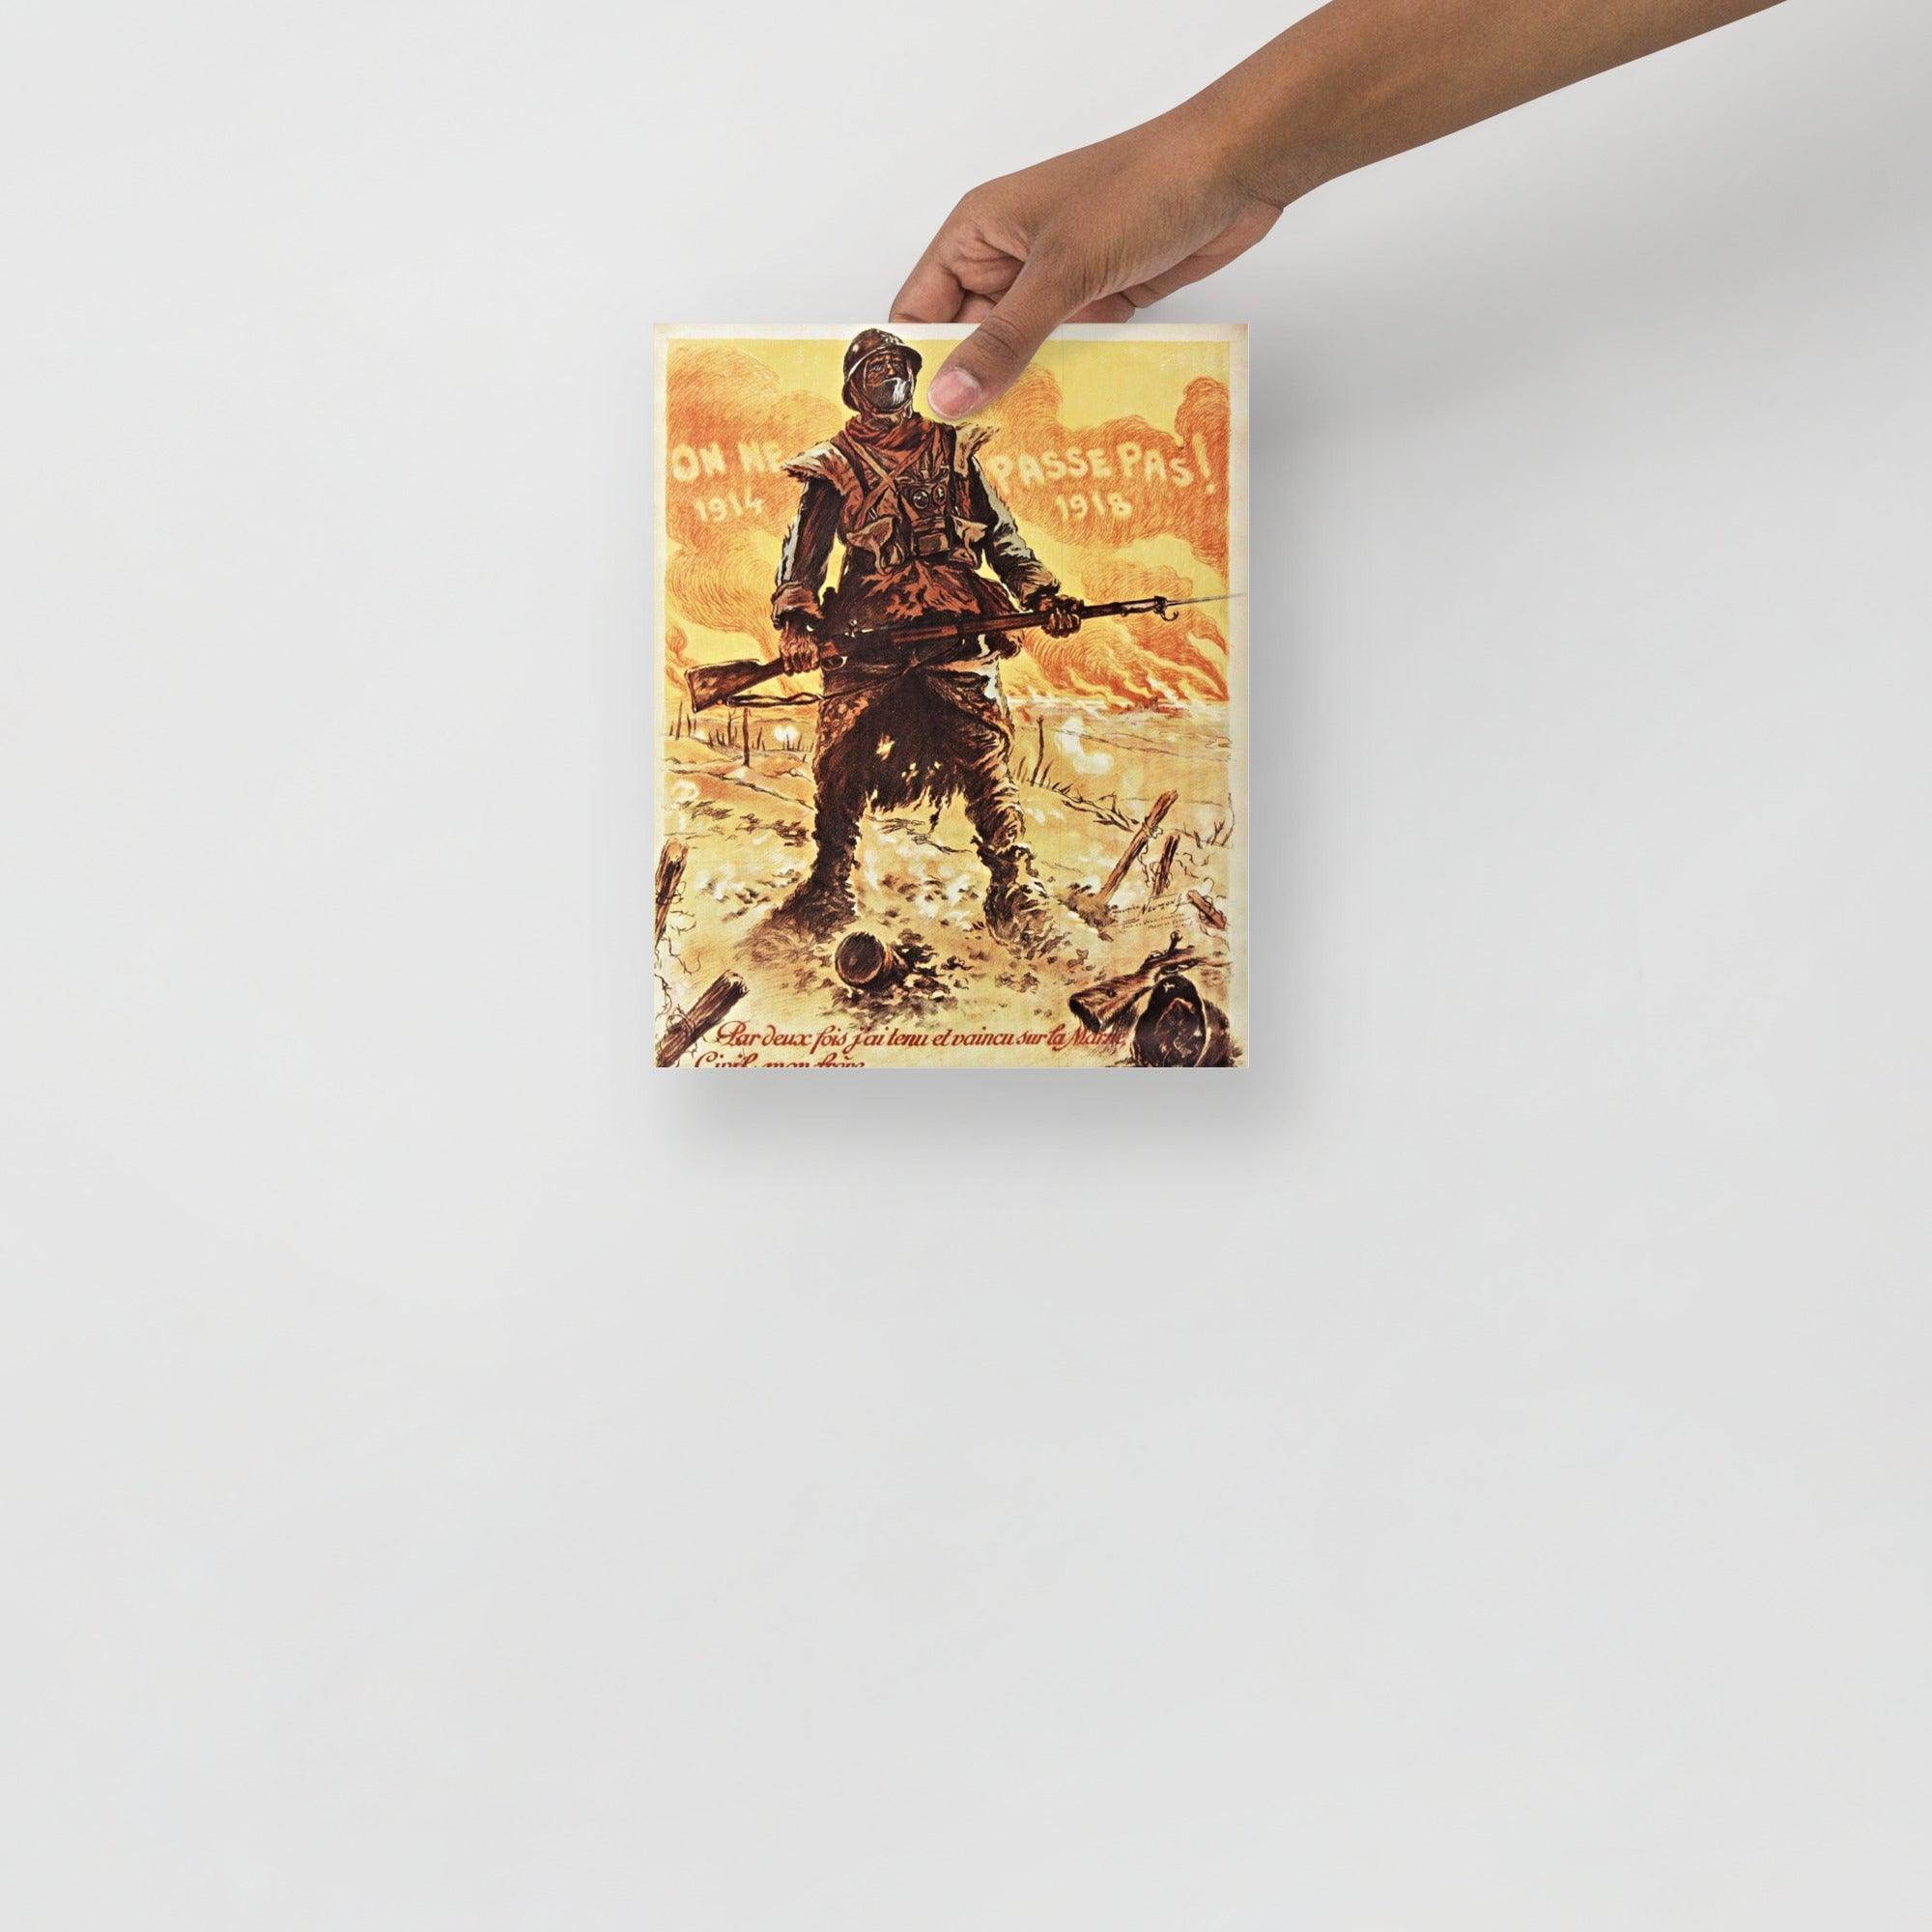 A They Shall Not Pass (On Ne Passe Pas) By Maurice Neumont poster on a plain backdrop in size 8x10”.